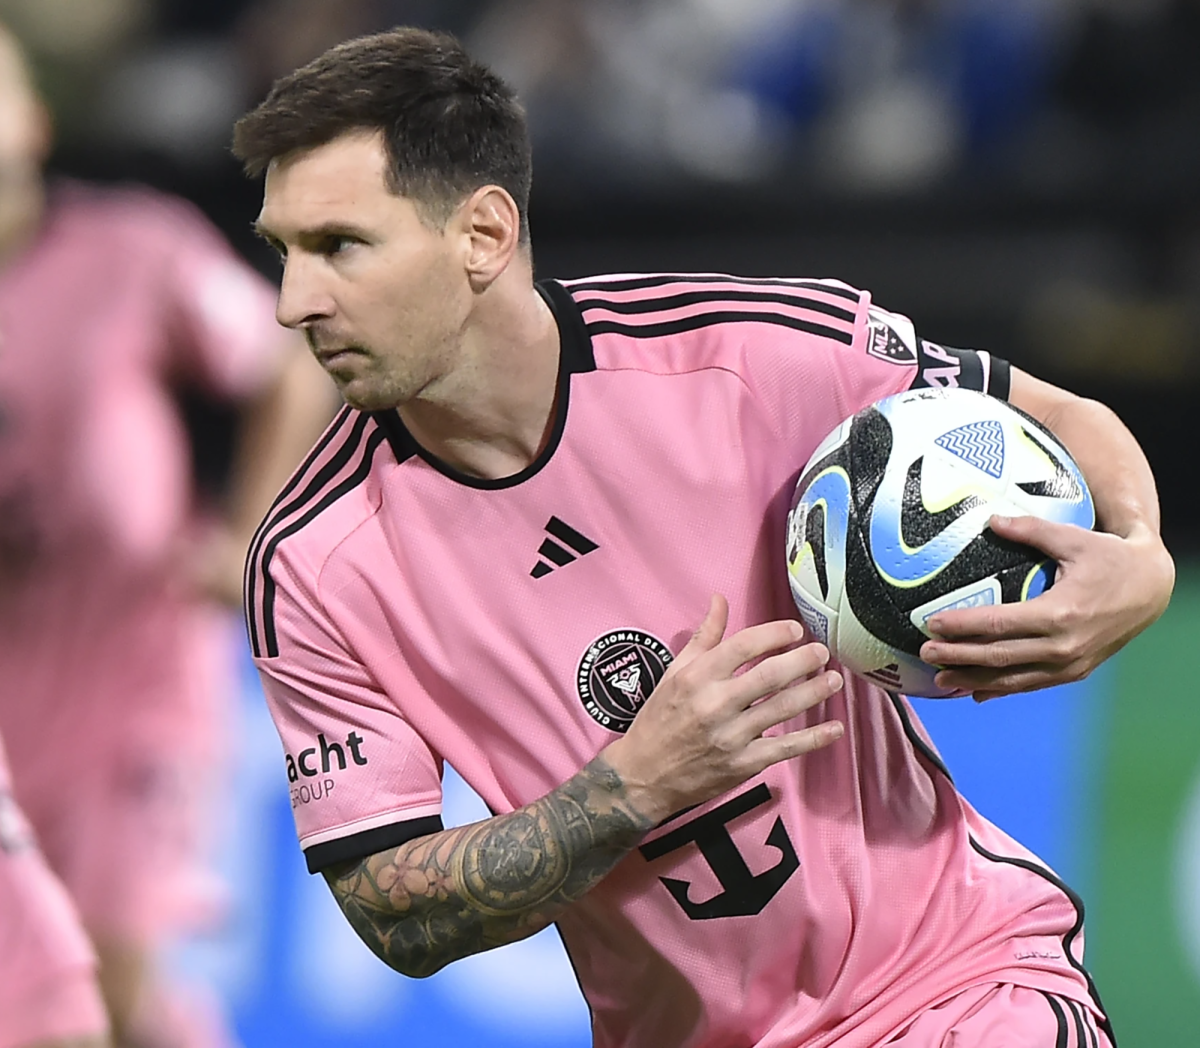 Lionel Messi runs with the ball during the Riyadh soccer match in Saudi Arabia, Jan. 29.